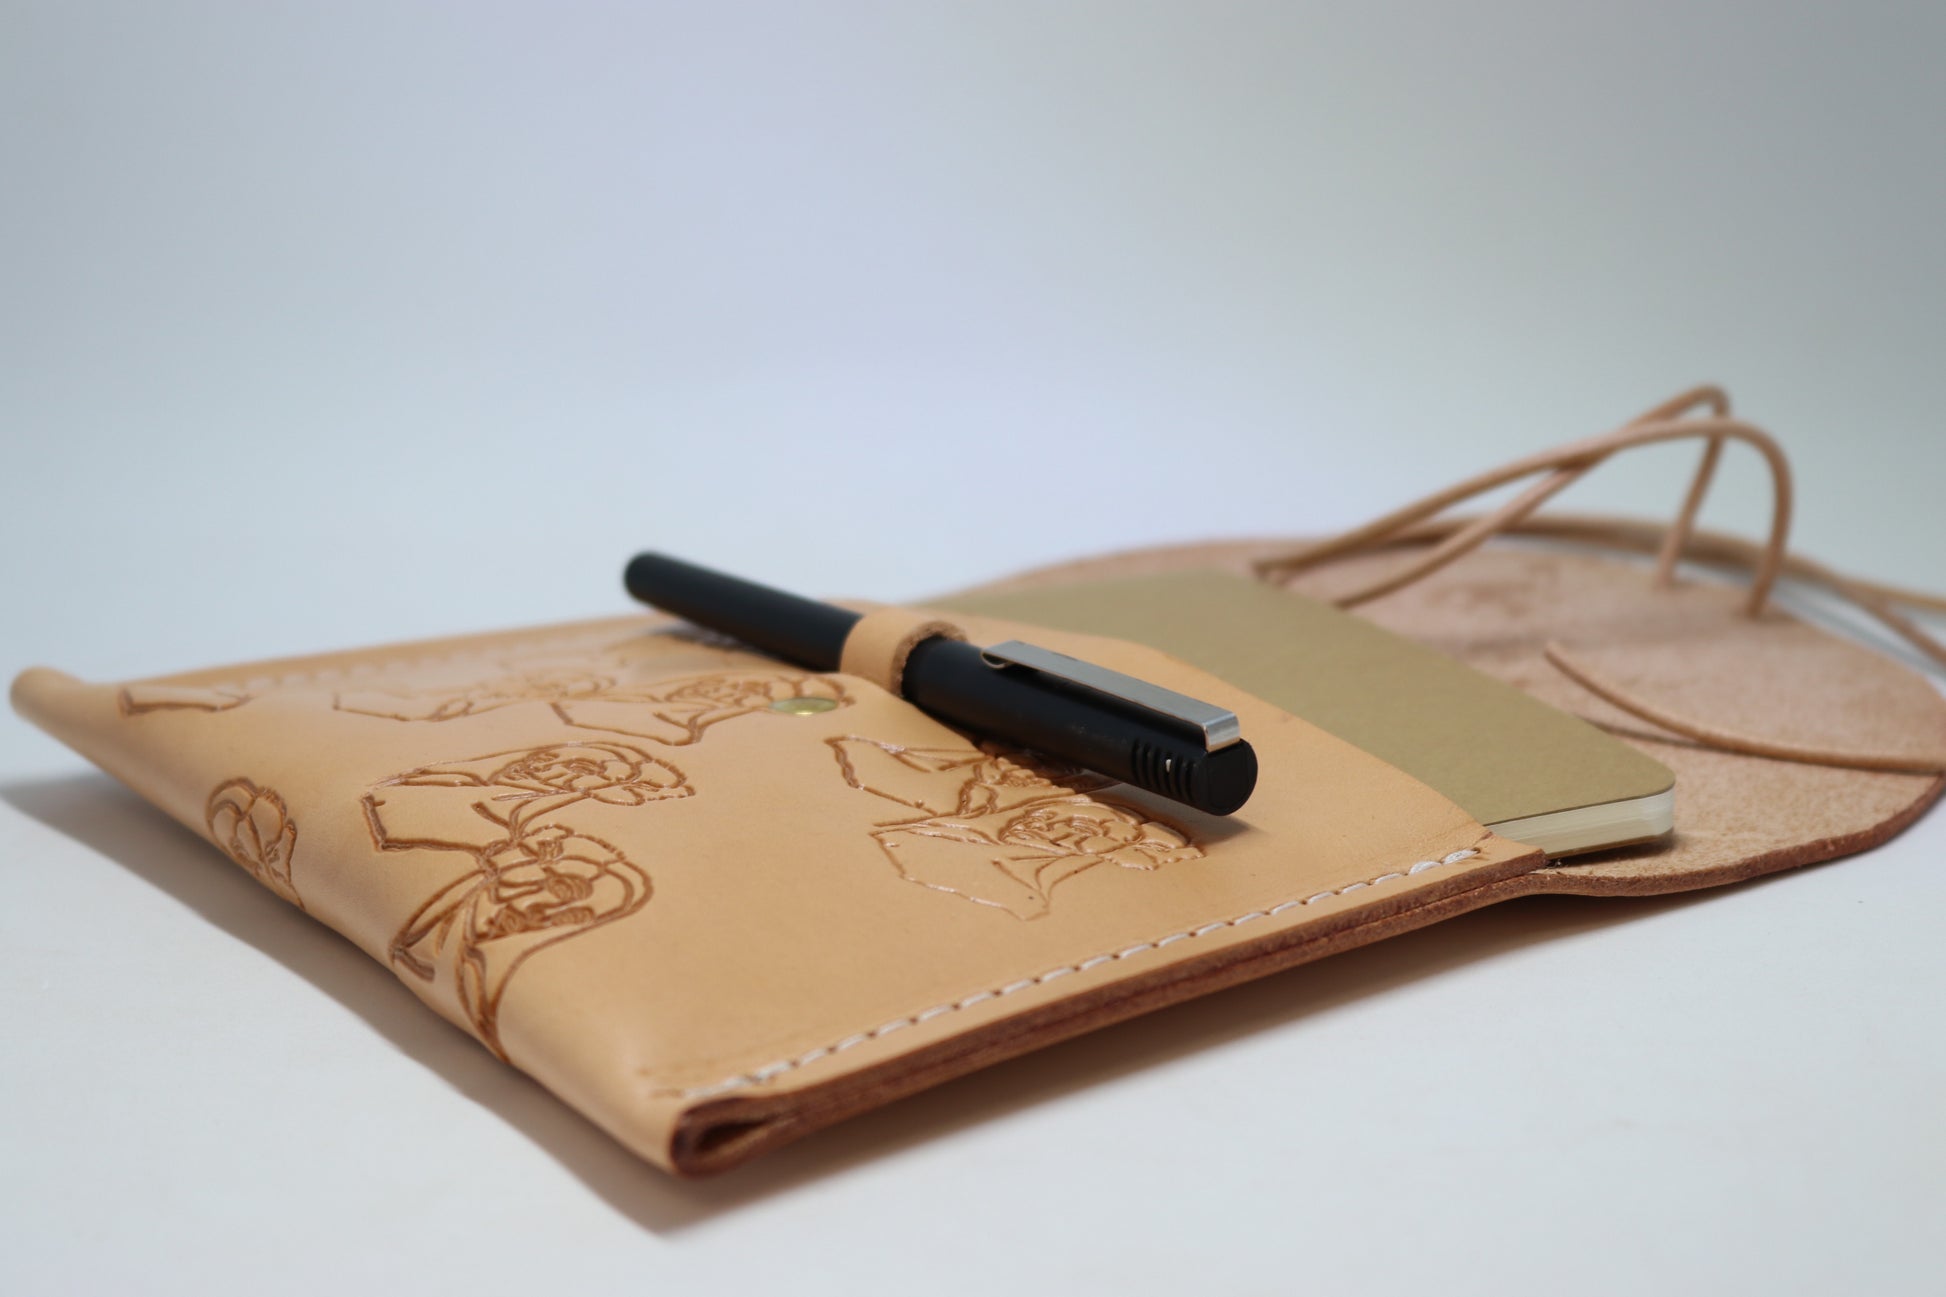 “Paniolo with her Pua” Leather Clutch with Notebook & Pen - Margaret Rice Studio